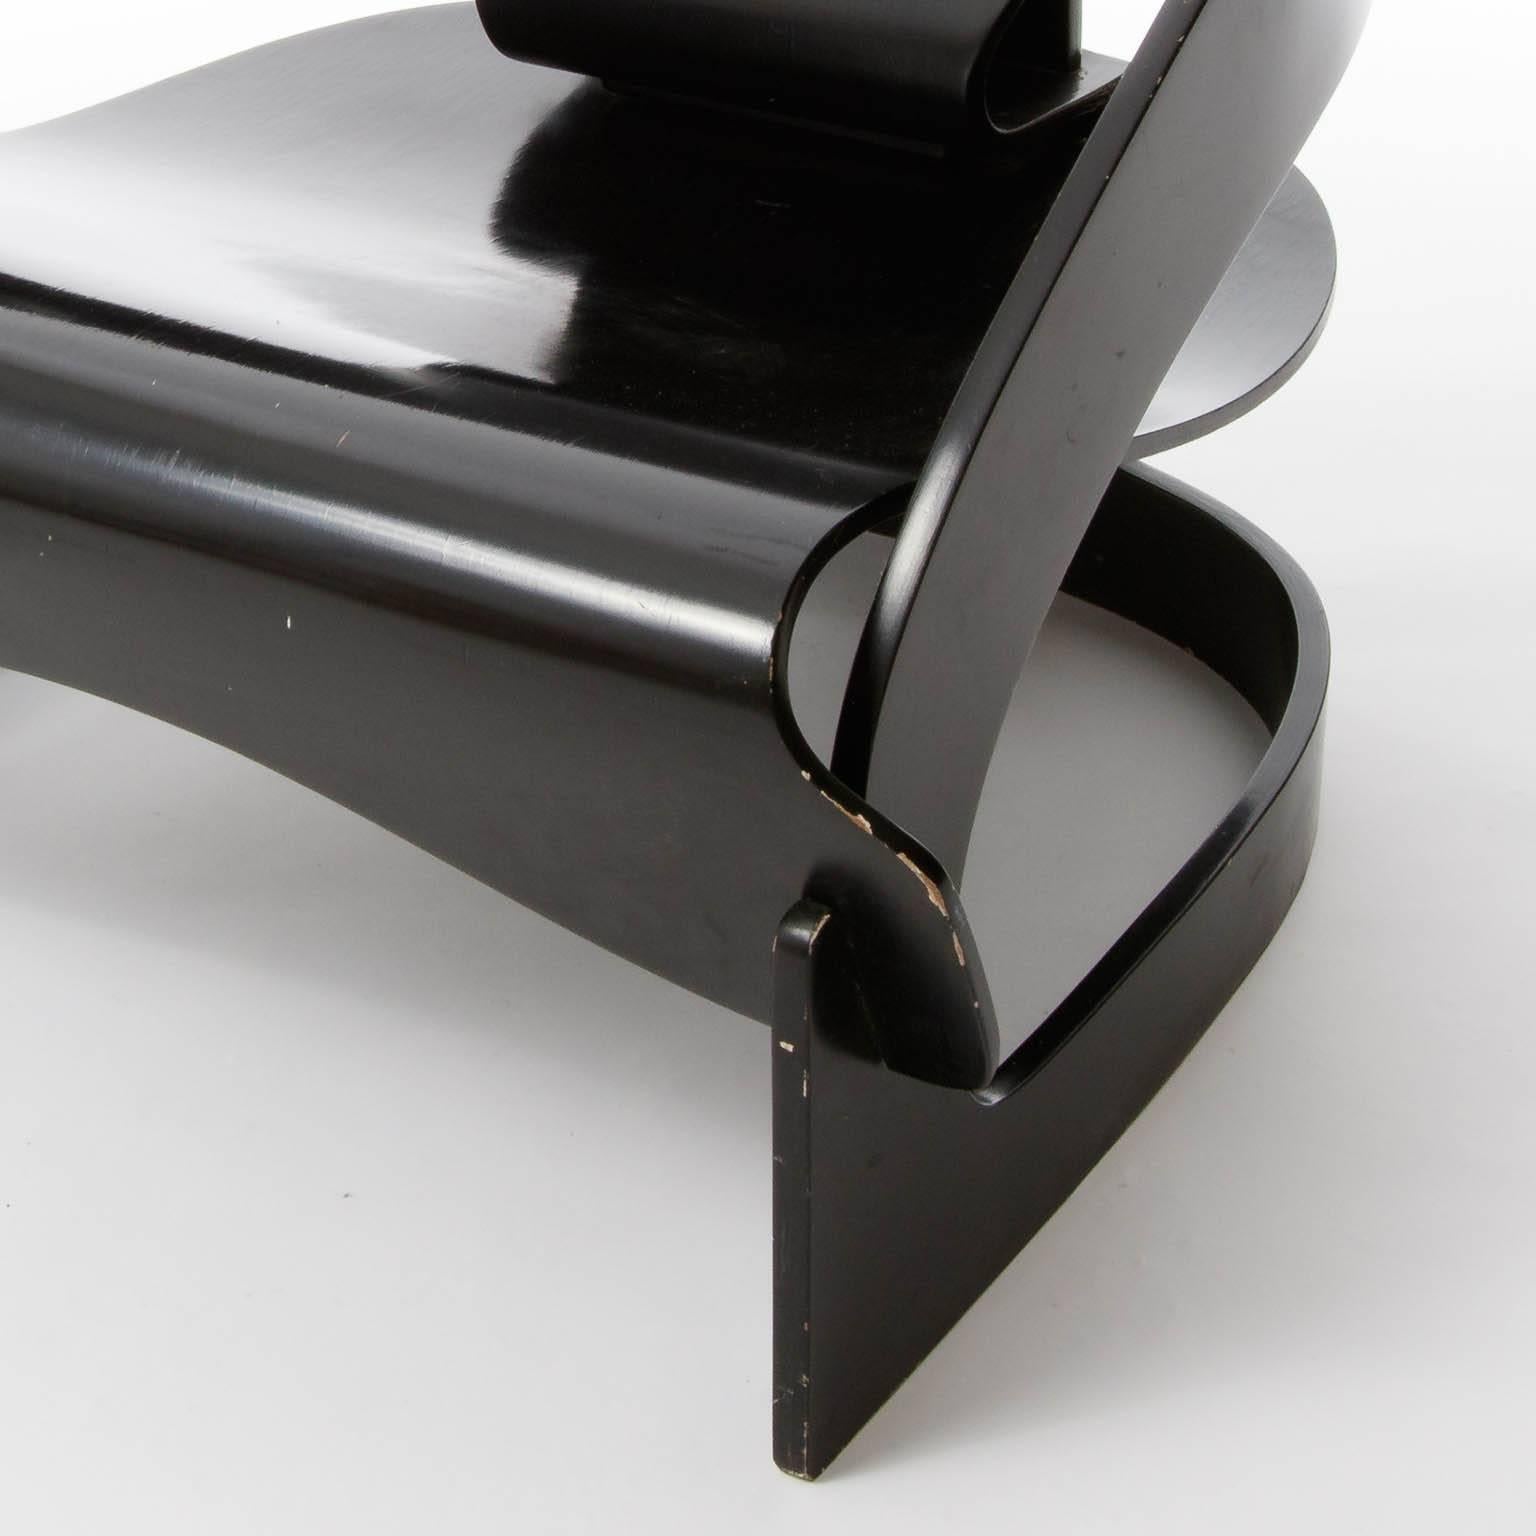 Lacquered Pair of Joe Colombo Chairs No. 4801, Black Plywood, Kartell, Italy, circa 1963 For Sale